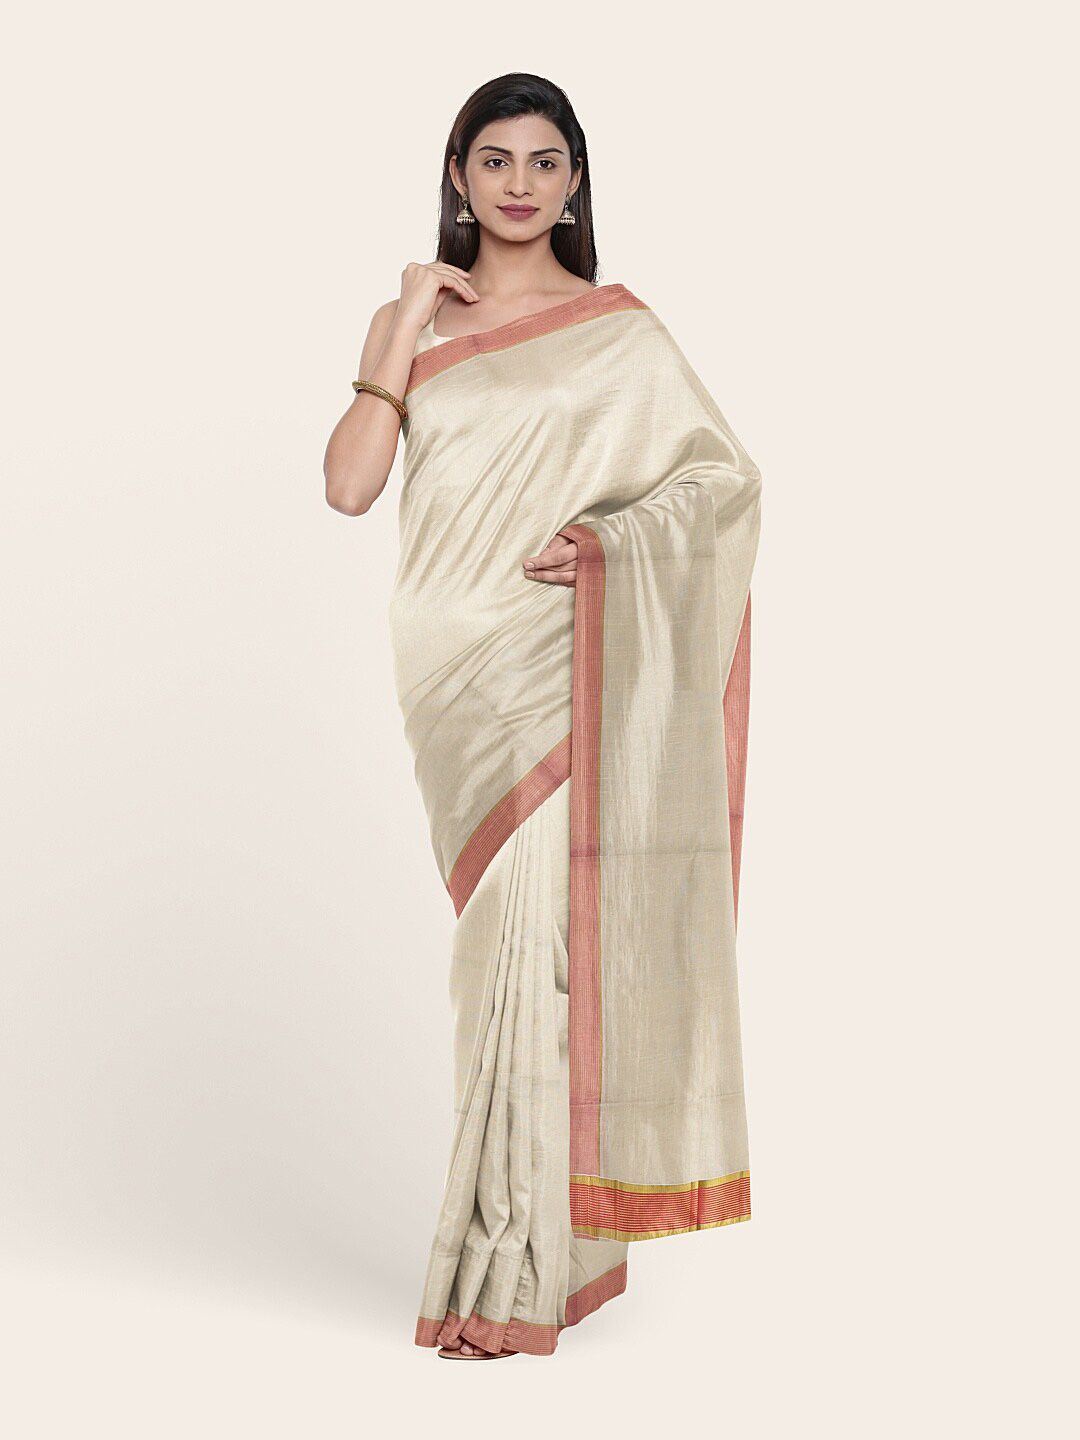 Pothys Off White & Red Pure Cotton Saree Price in India